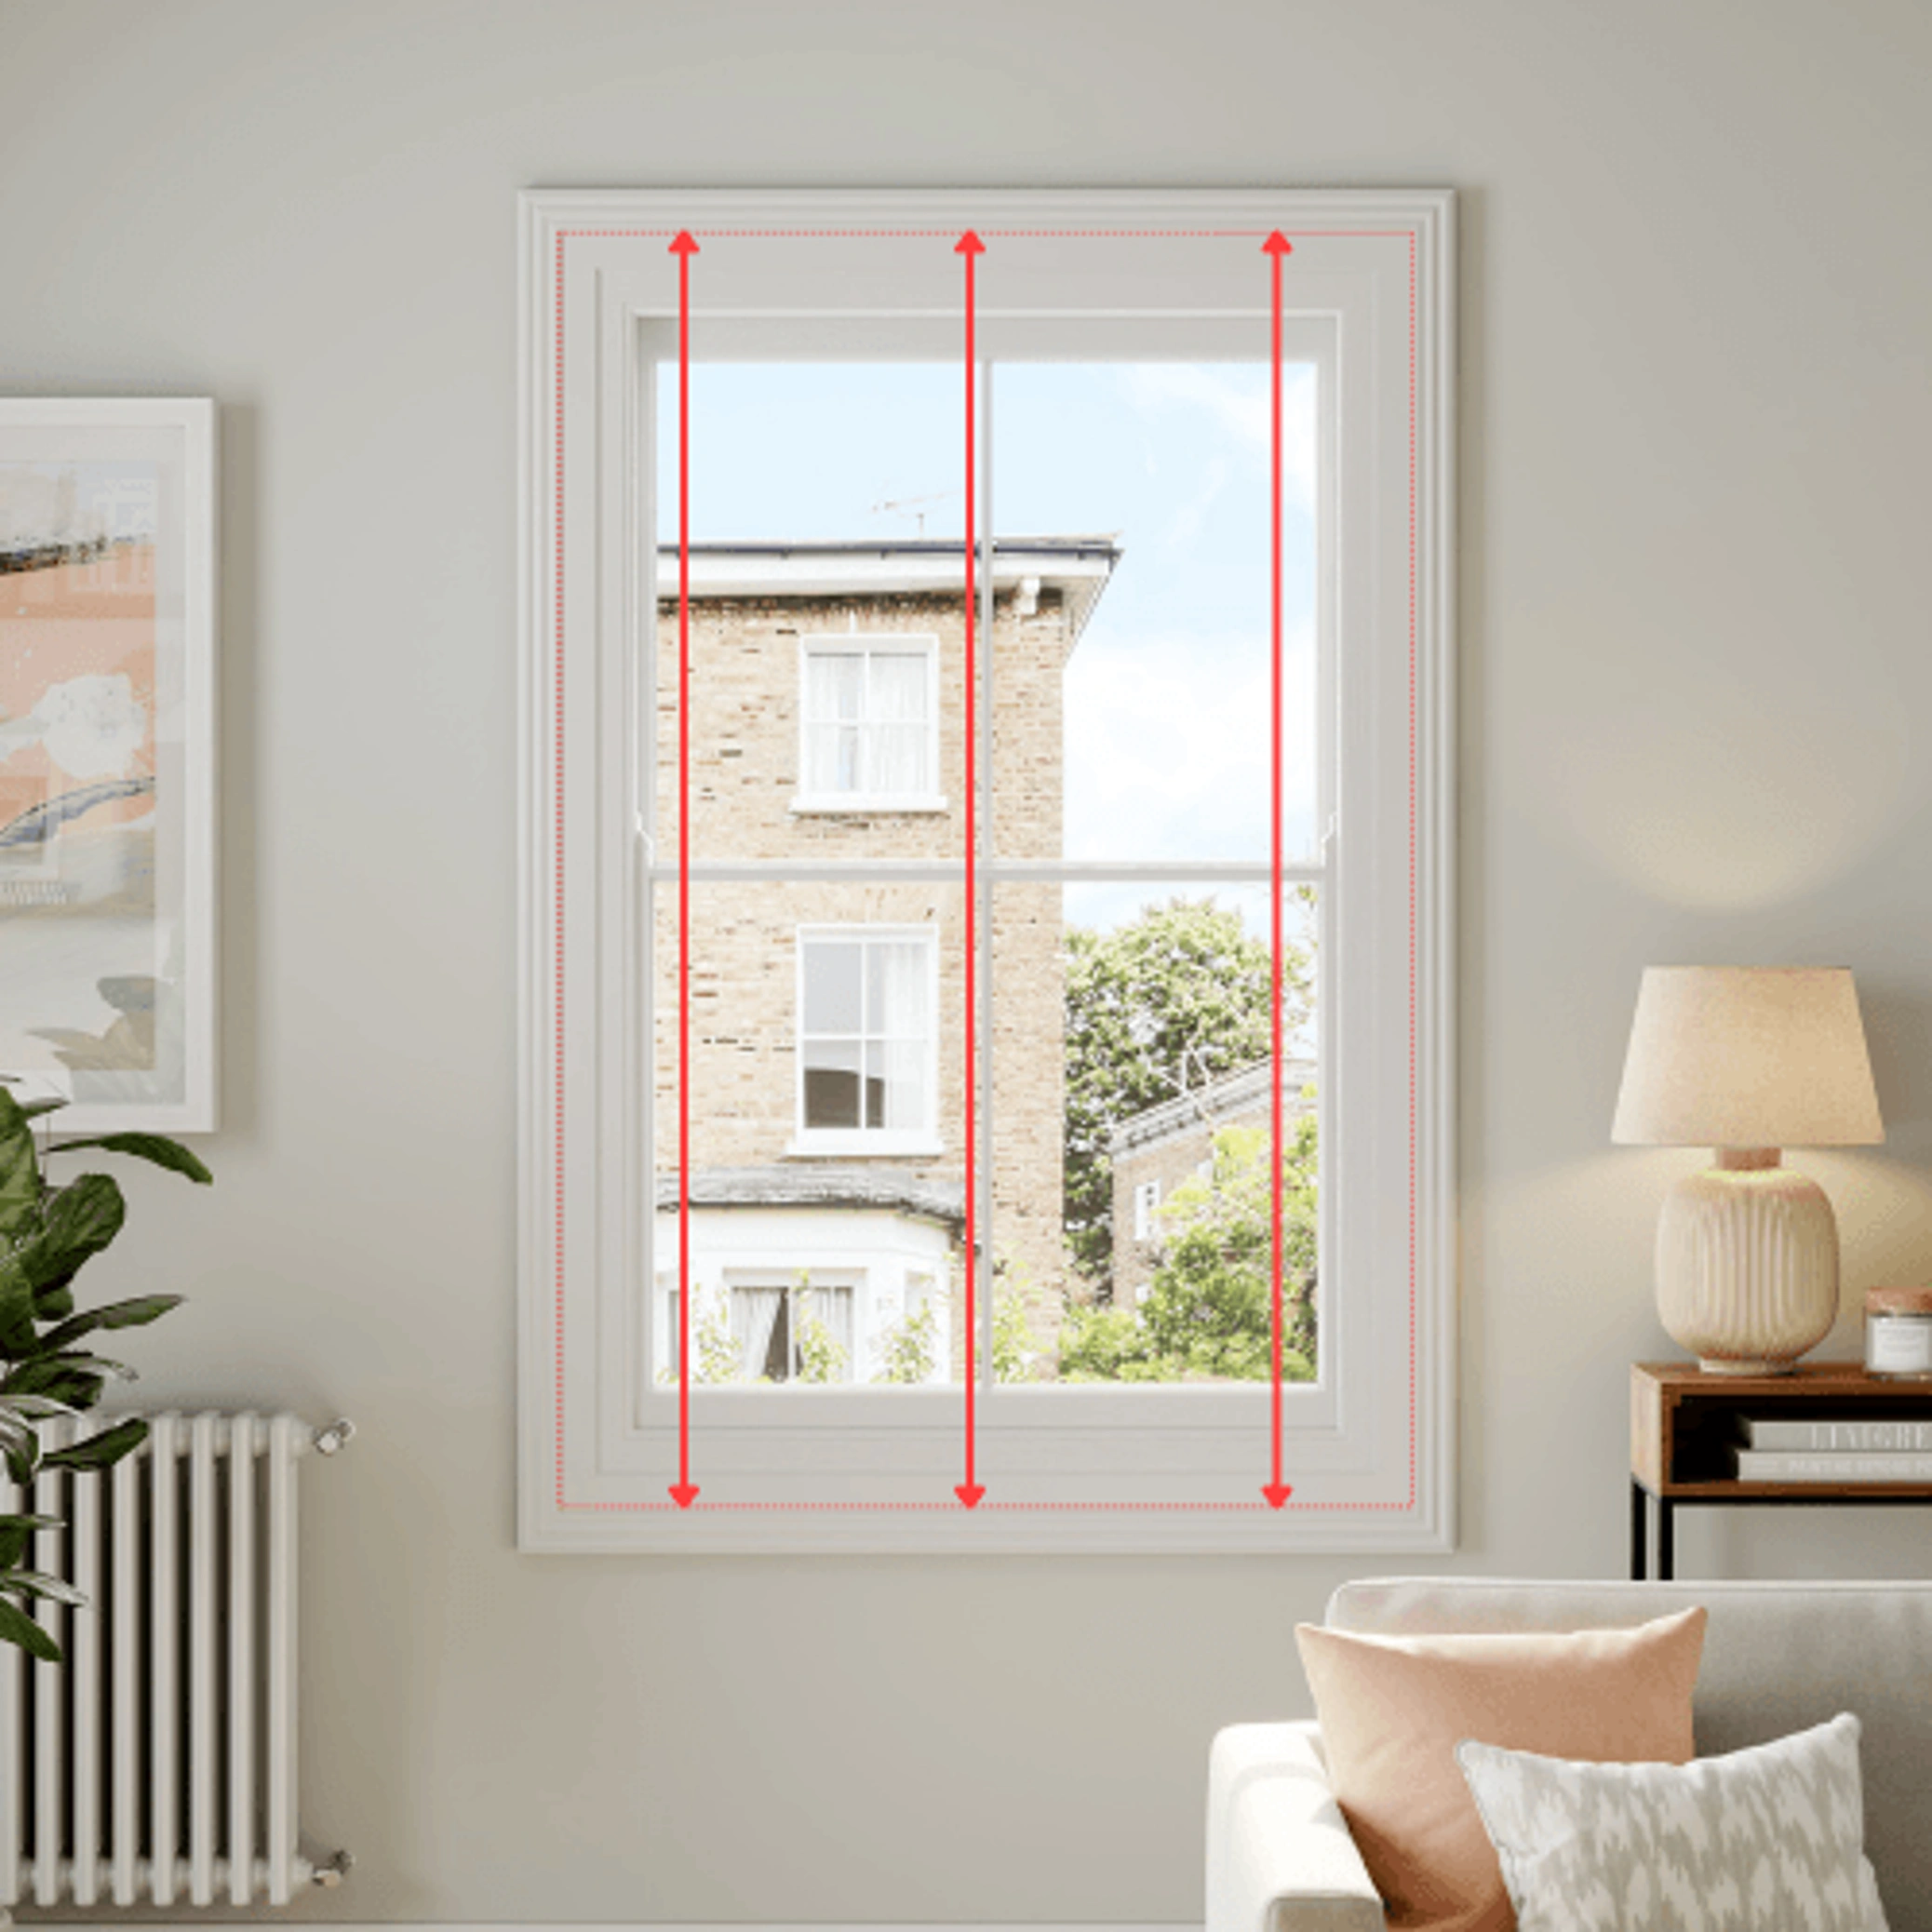 Measuring a the height of a non recessed window